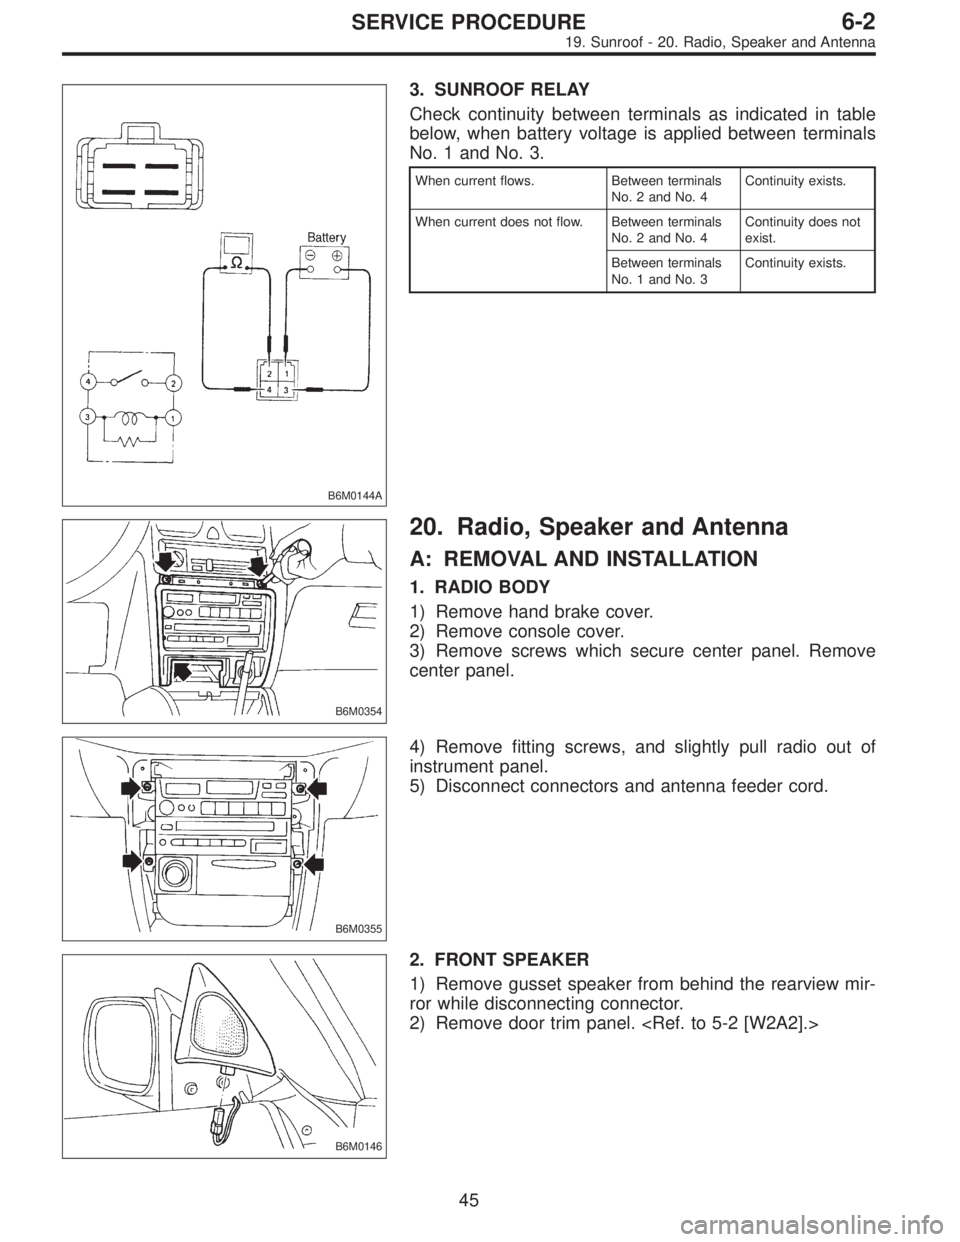 SUBARU LEGACY 1995  Service Repair Manual B6M0144A
3. SUNROOF RELAY
Check continuity between terminals as indicated in table
below, when battery voltage is applied between terminals
No. 1 and No. 3.
When current flows. Between terminals
No. 2